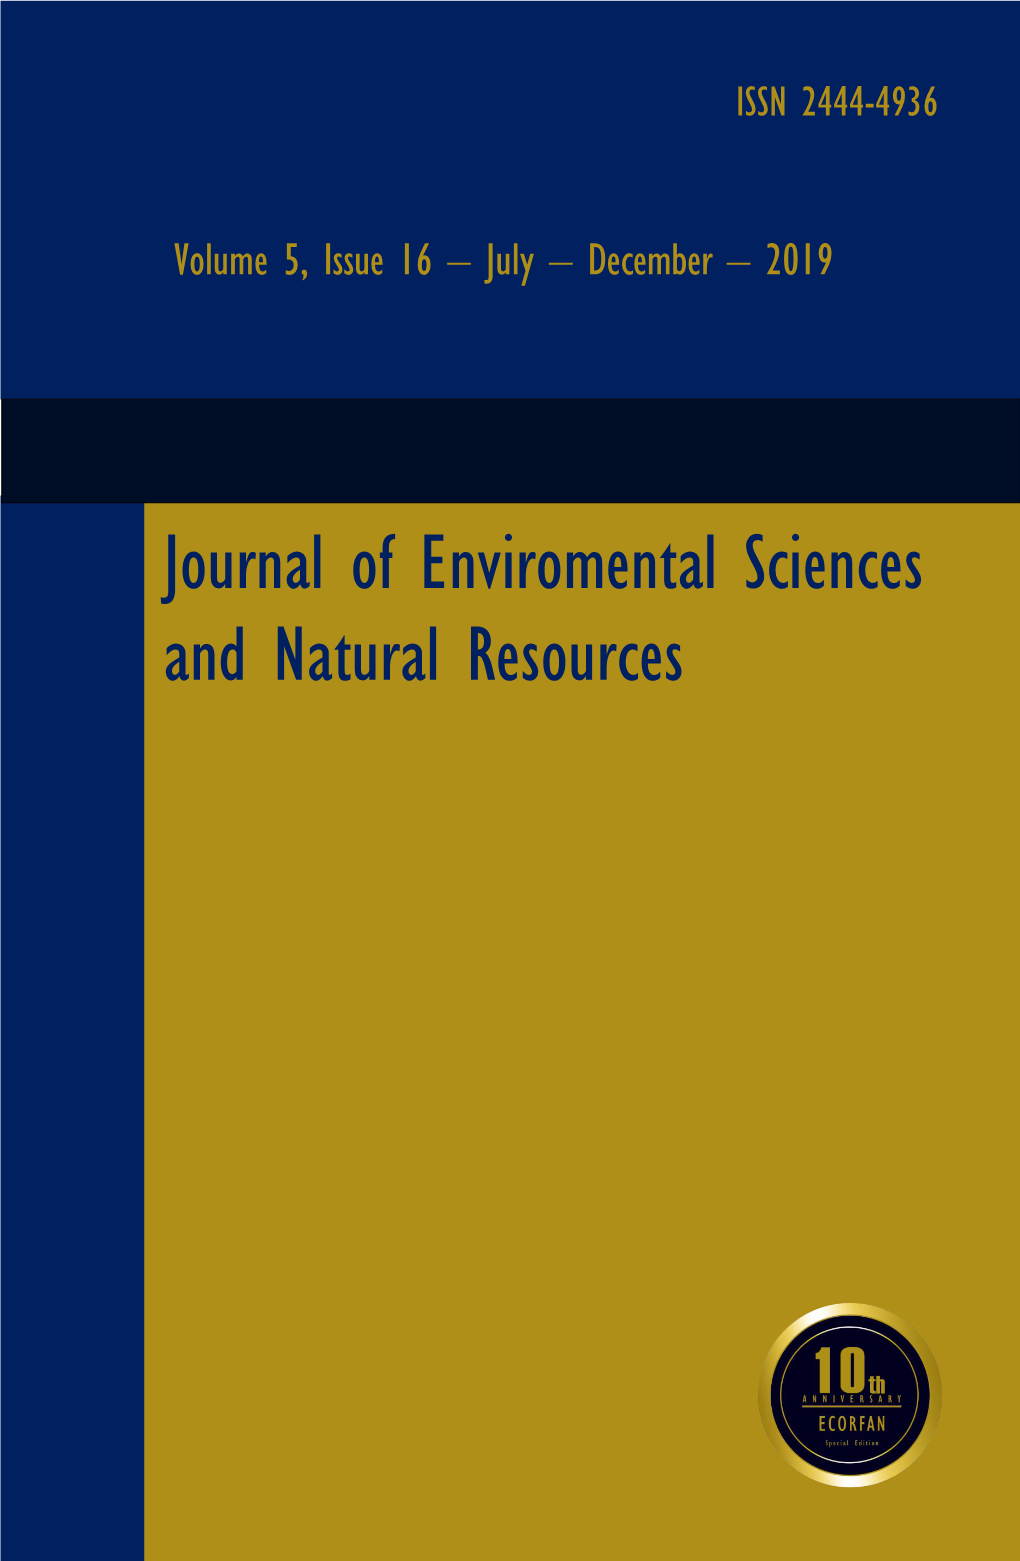 Journal of Enviromental Sciences and Natural Resources